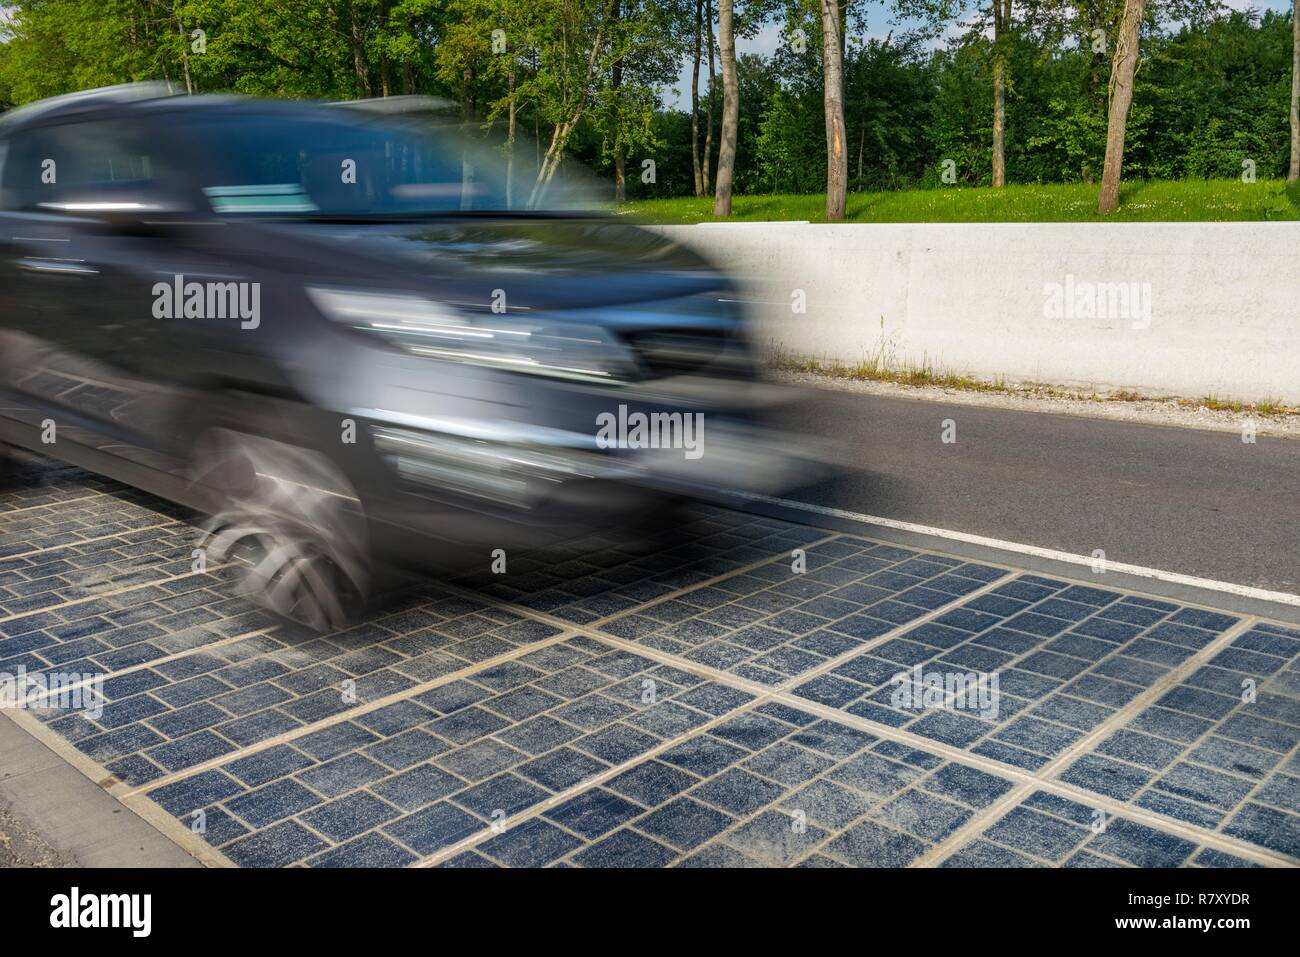 France, Orne, Tourouvre, solar road, one kilometer road, equipped with photovoltaic cells, producing an average of 409 kWh per day Stock Photo